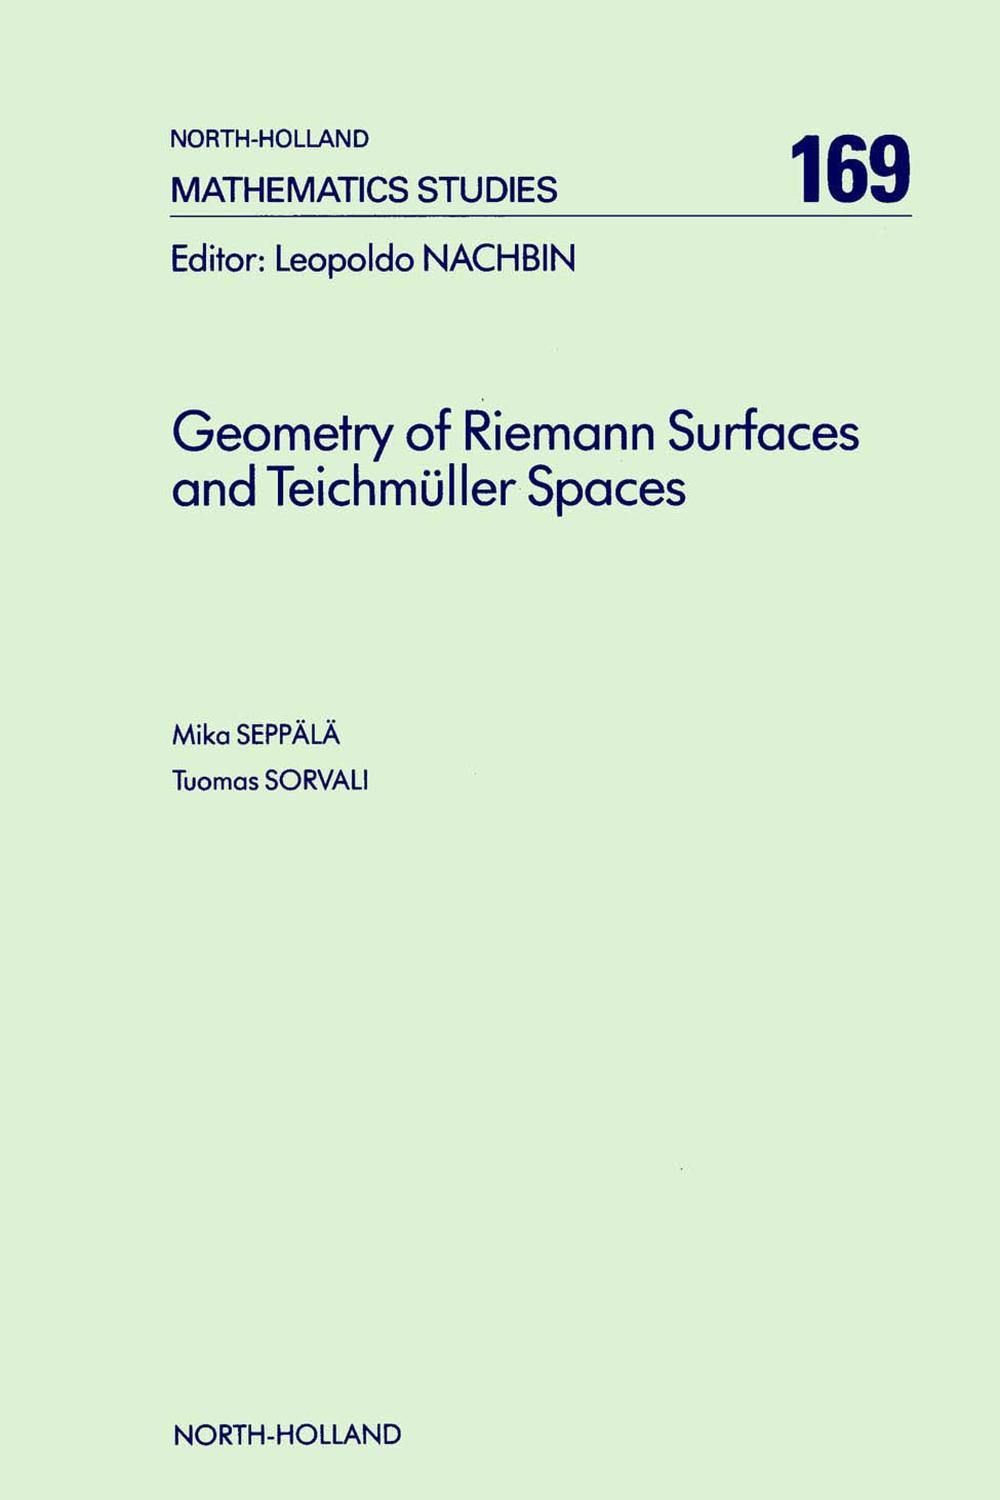 Geometry of Riemann Surfaces and Teichmüller Spaces - M. Seppälä, T. Sorvali